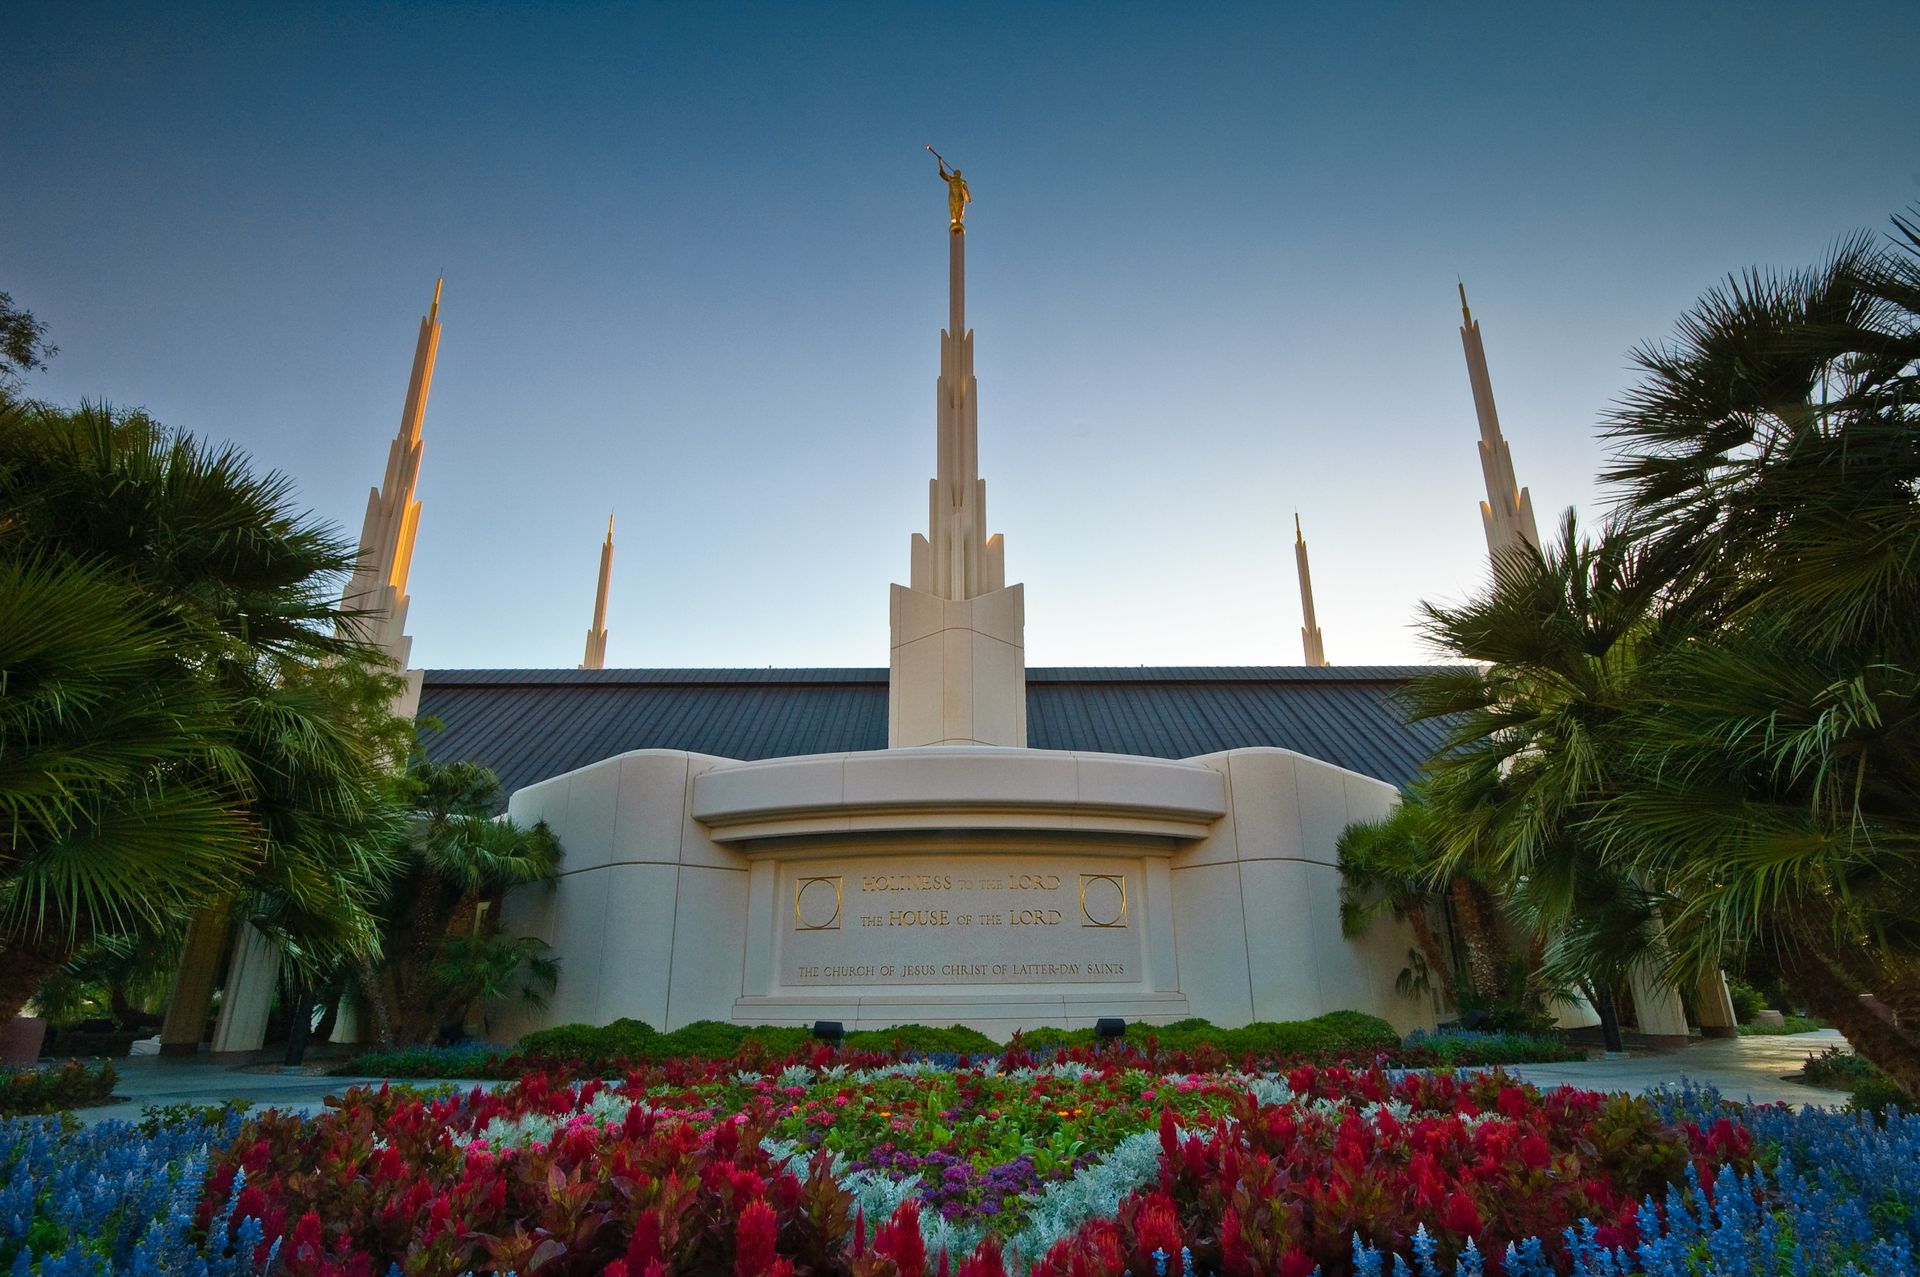 The Las Vegas Nevada Temple engraving, “Holiness to the Lord: The House of the Lord,” including the spires and scenery.